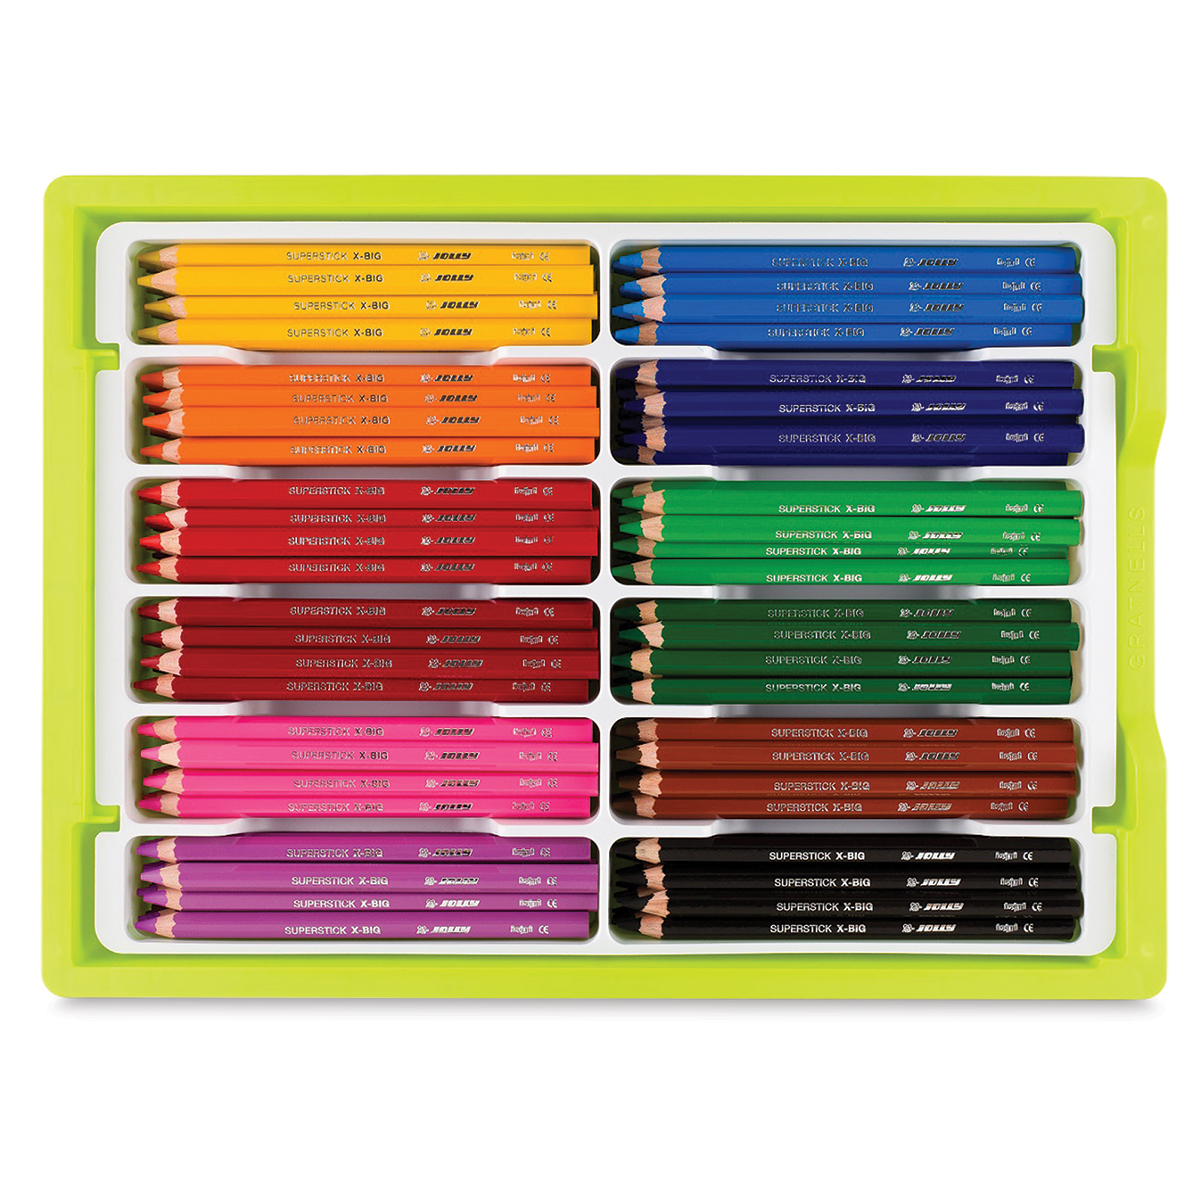 Jolly Superstick Colored Pencil Sets